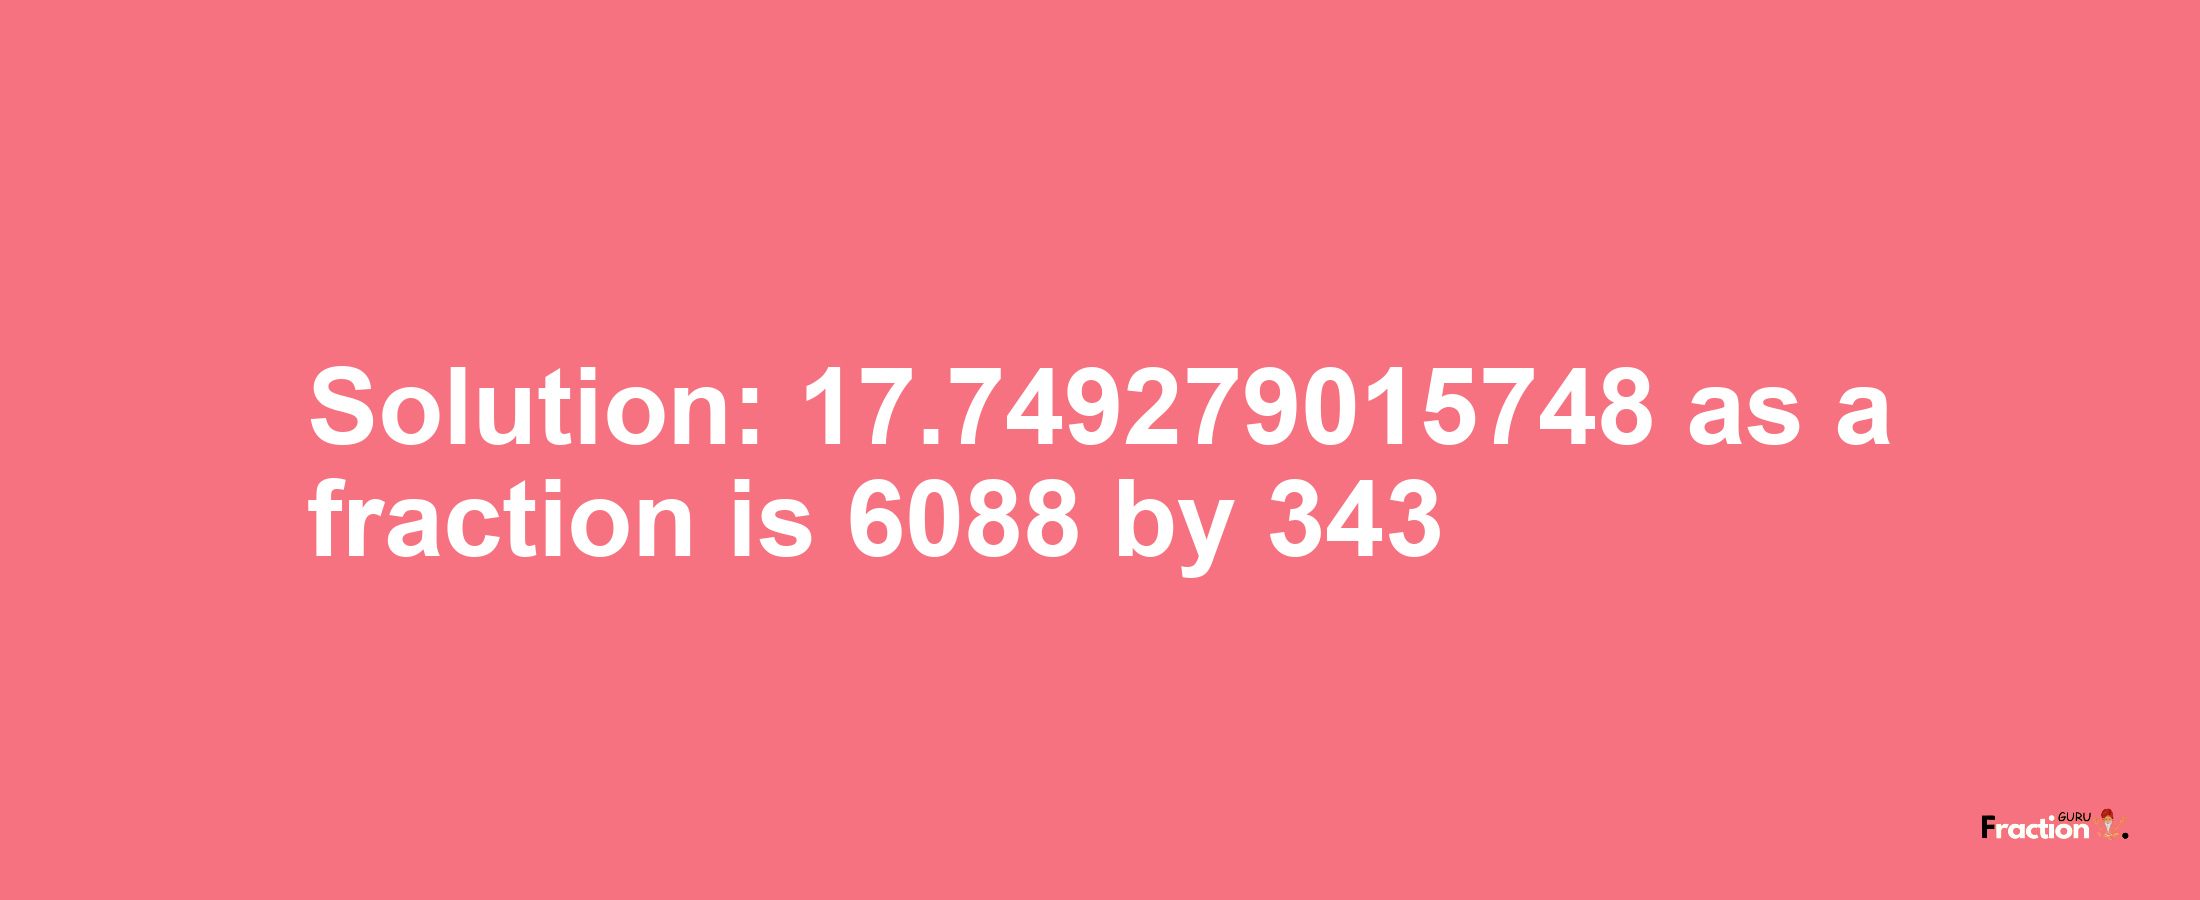 Solution:17.749279015748 as a fraction is 6088/343